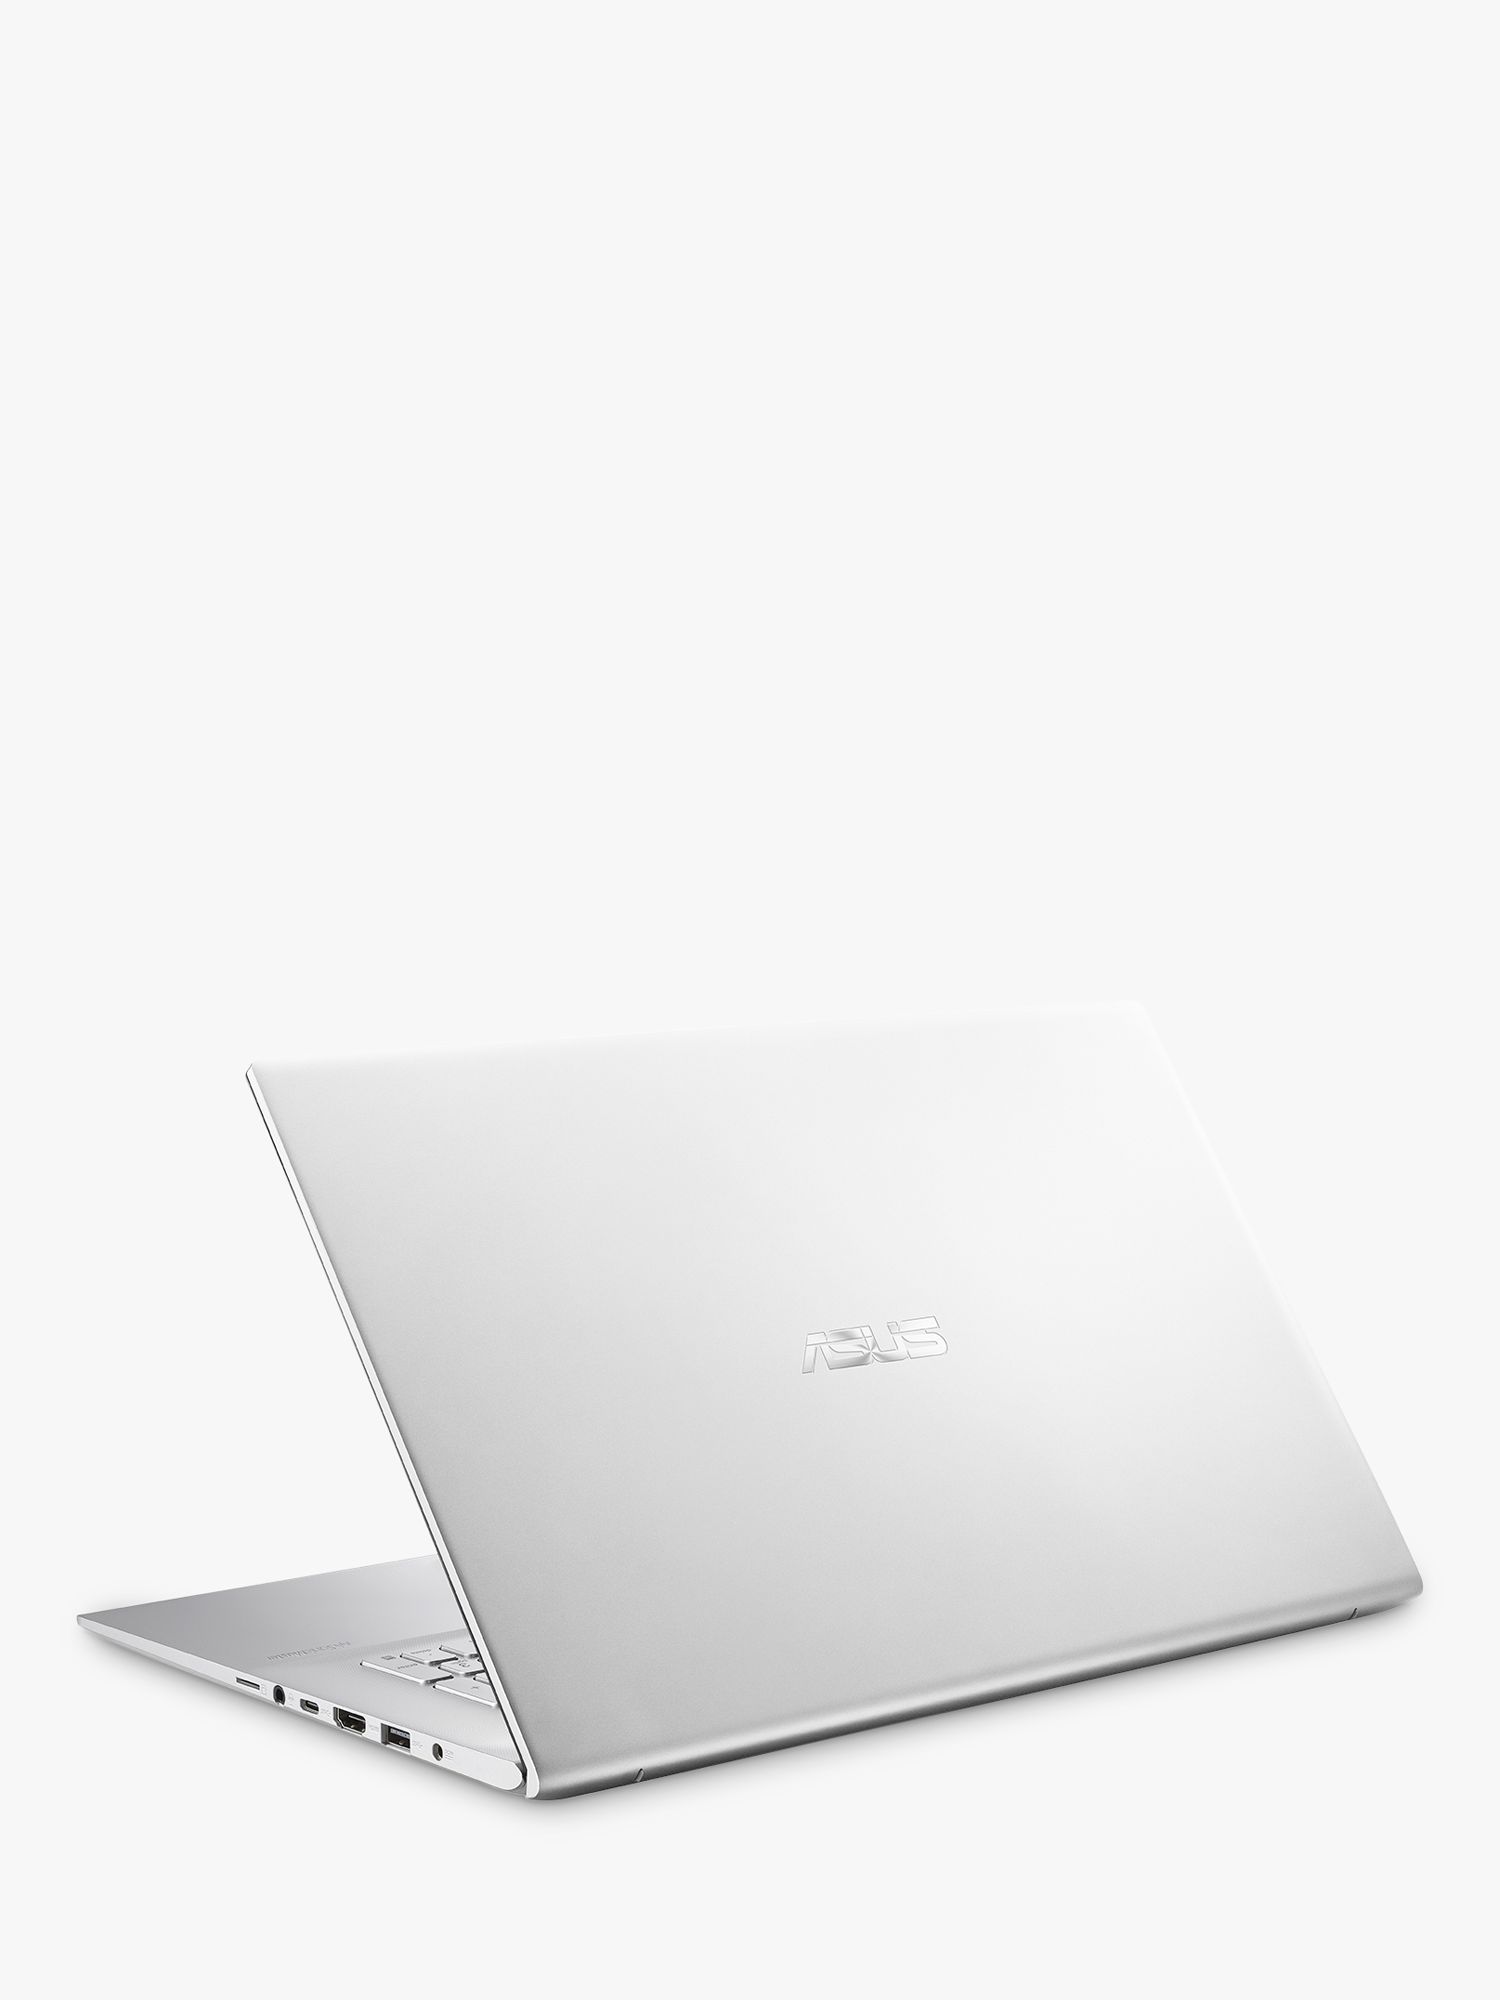 ASUS 2022 Newest Vivobook 17 Laptop, 17.3 Full HD 1080P Non-Touch Display,  Intel Core i3-1115G4 Processor, 12GB DDR4 RAM, 512GB PCIe SSD, Backlit